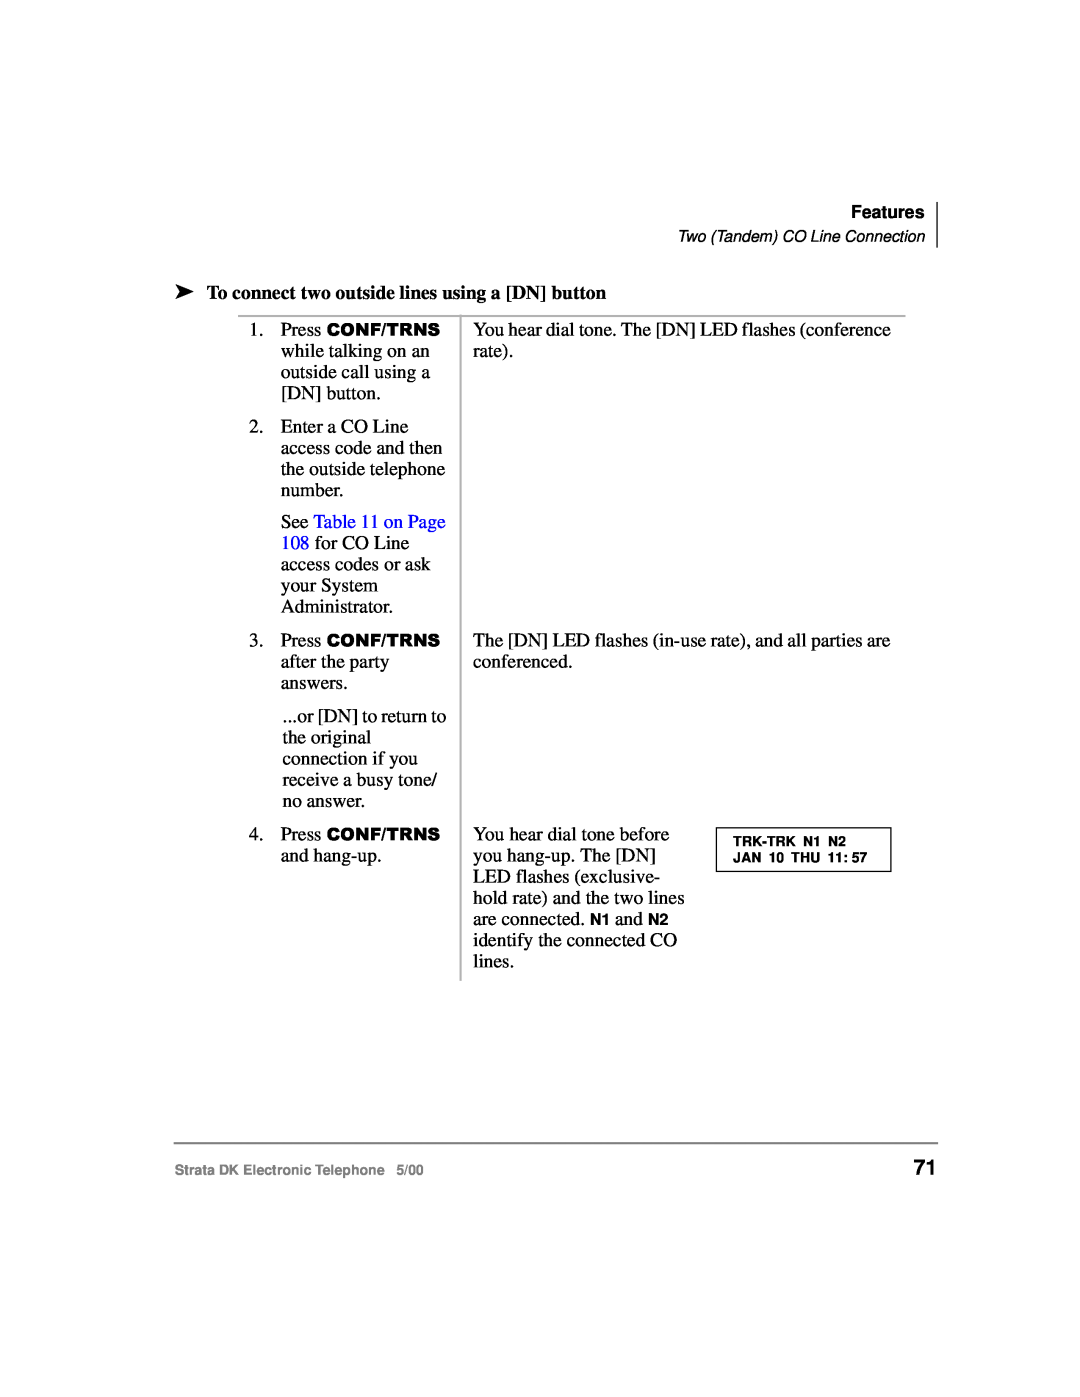 Toshiba Strata DK manual To connect two outside lines using a DN button, access code and then 